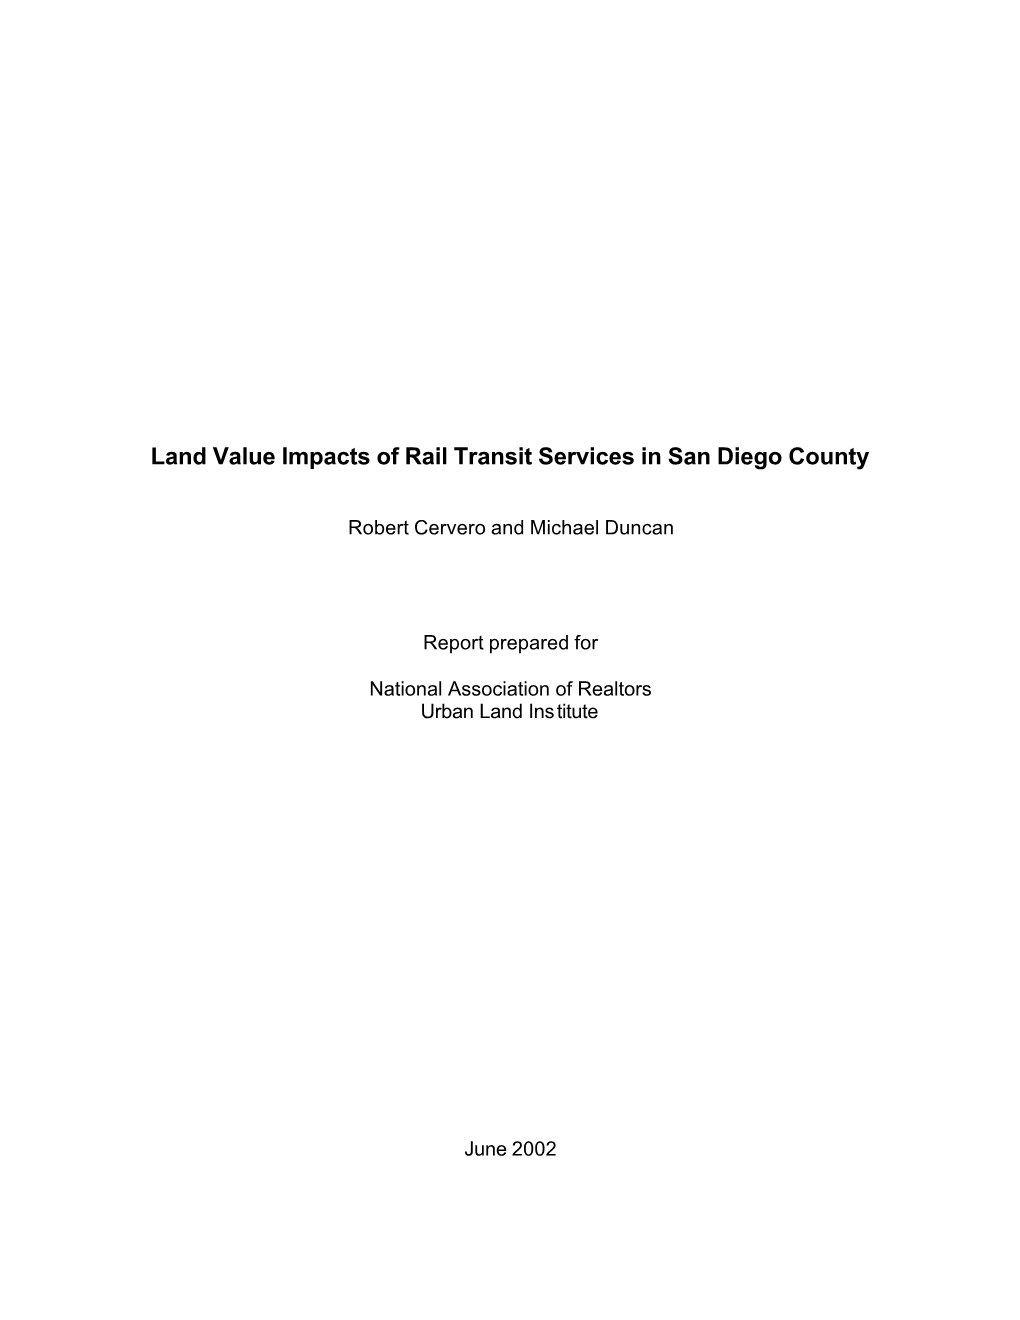 Land Value Impacts of Rail Transit Services in San Diego County